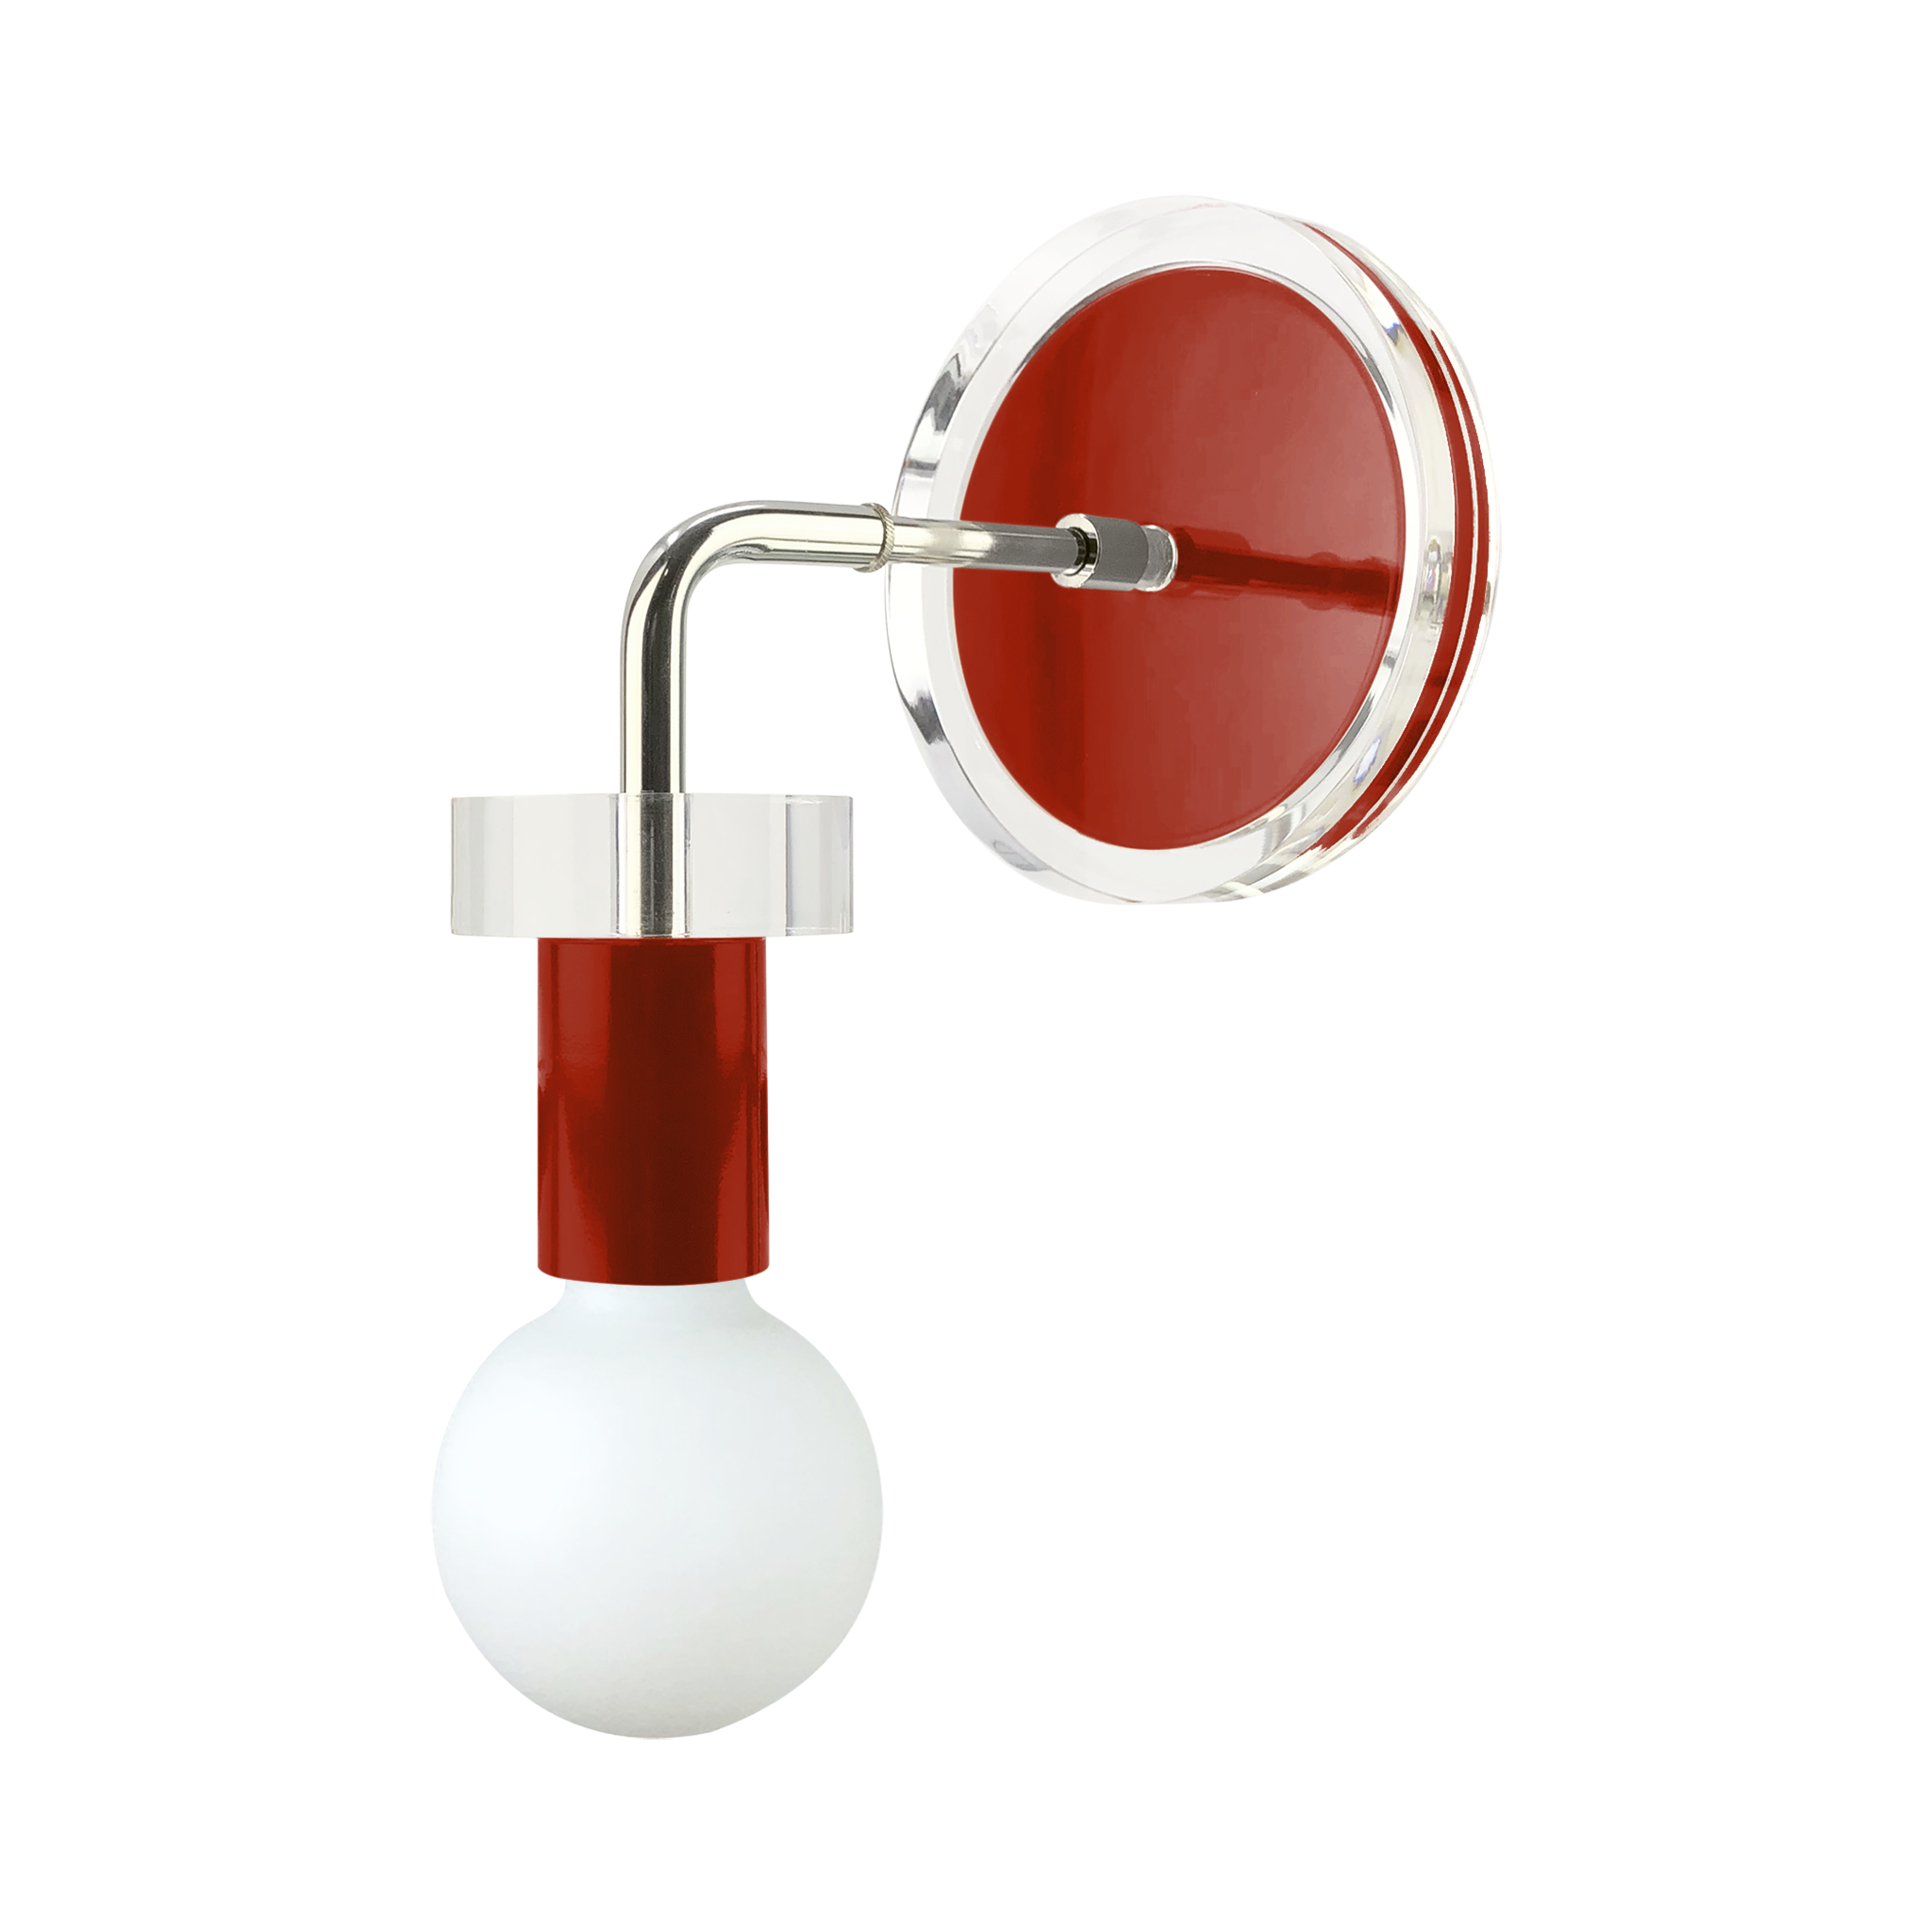 Nickel and riding hood red color Adore sconce Dutton Brown lighting